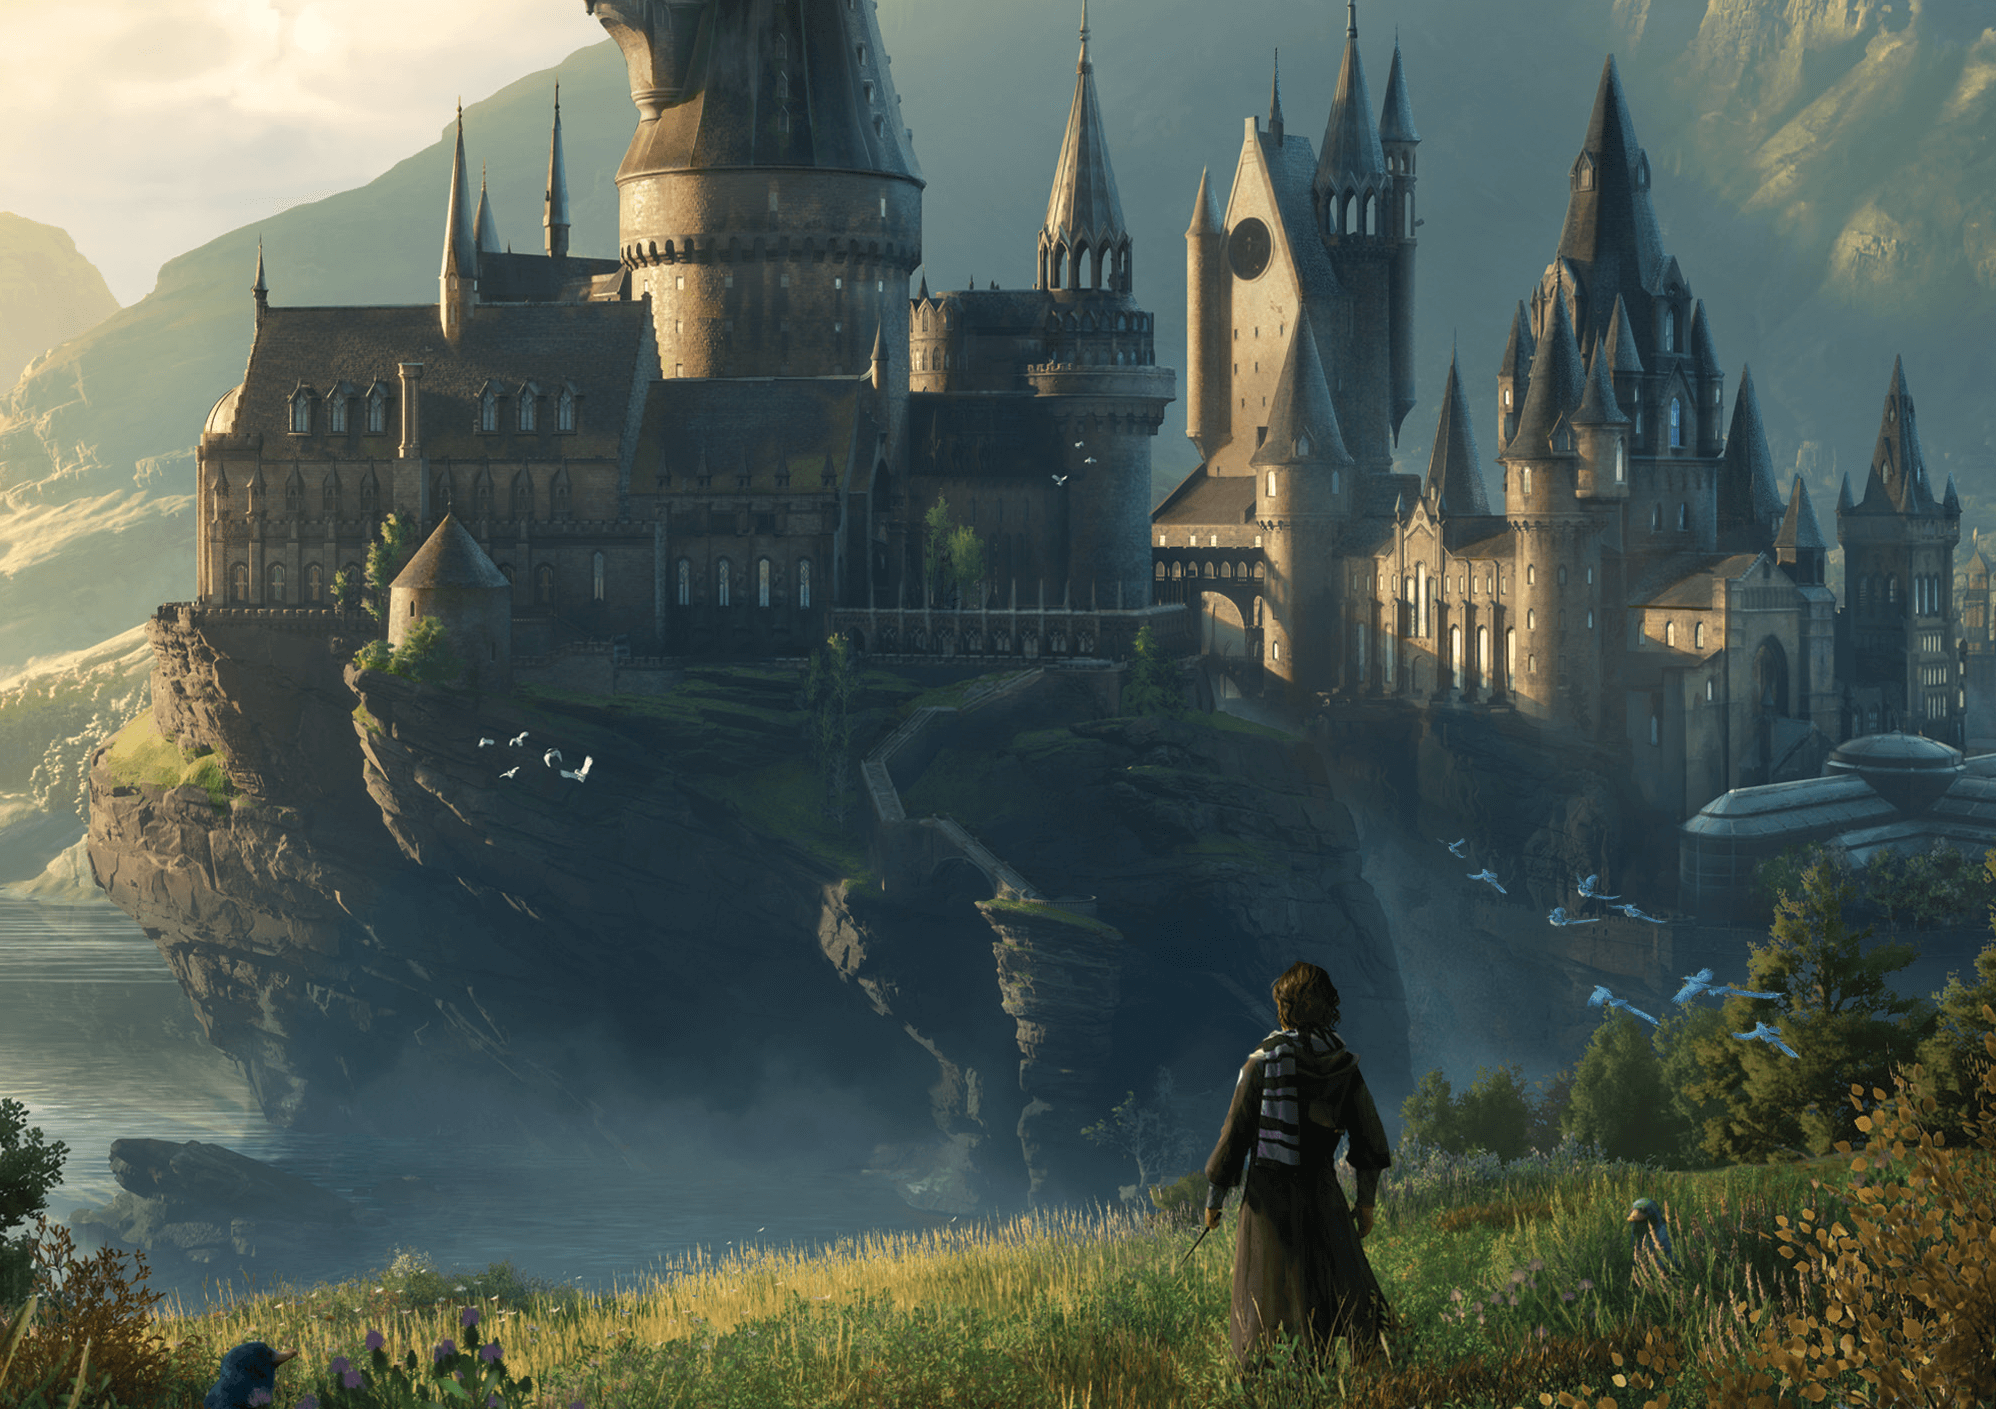 The Art and Making of Hogwarts Legacy: Exploring the Unwritten